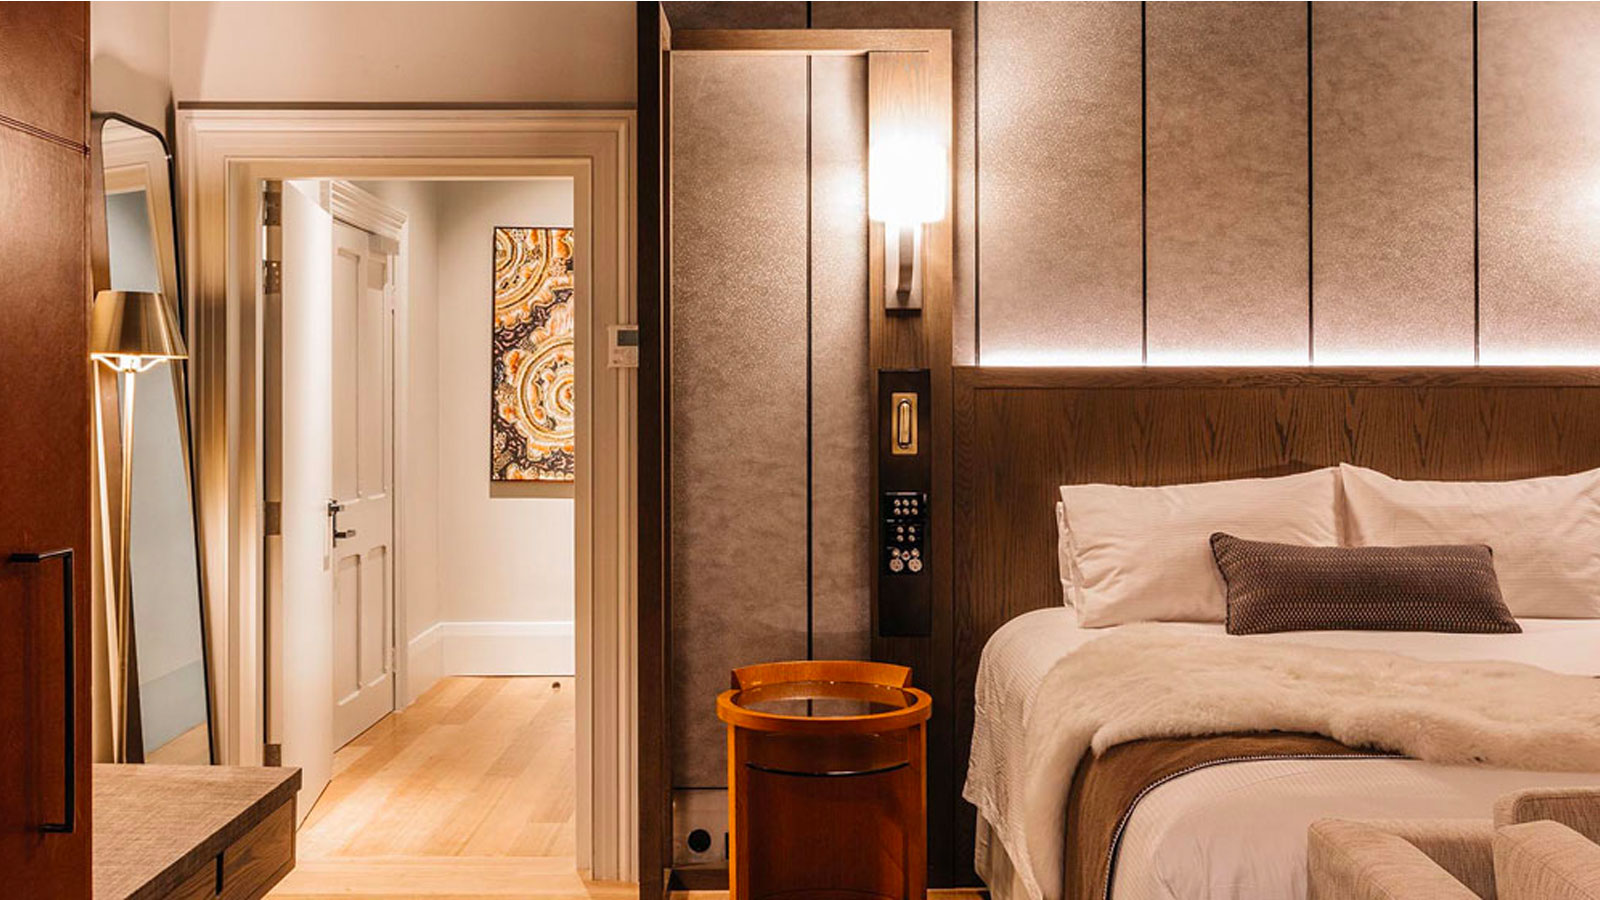 Marriott International has confirmed the opening date for its newest property, which will also mark the Australian debut of the Luxury Collection brand.